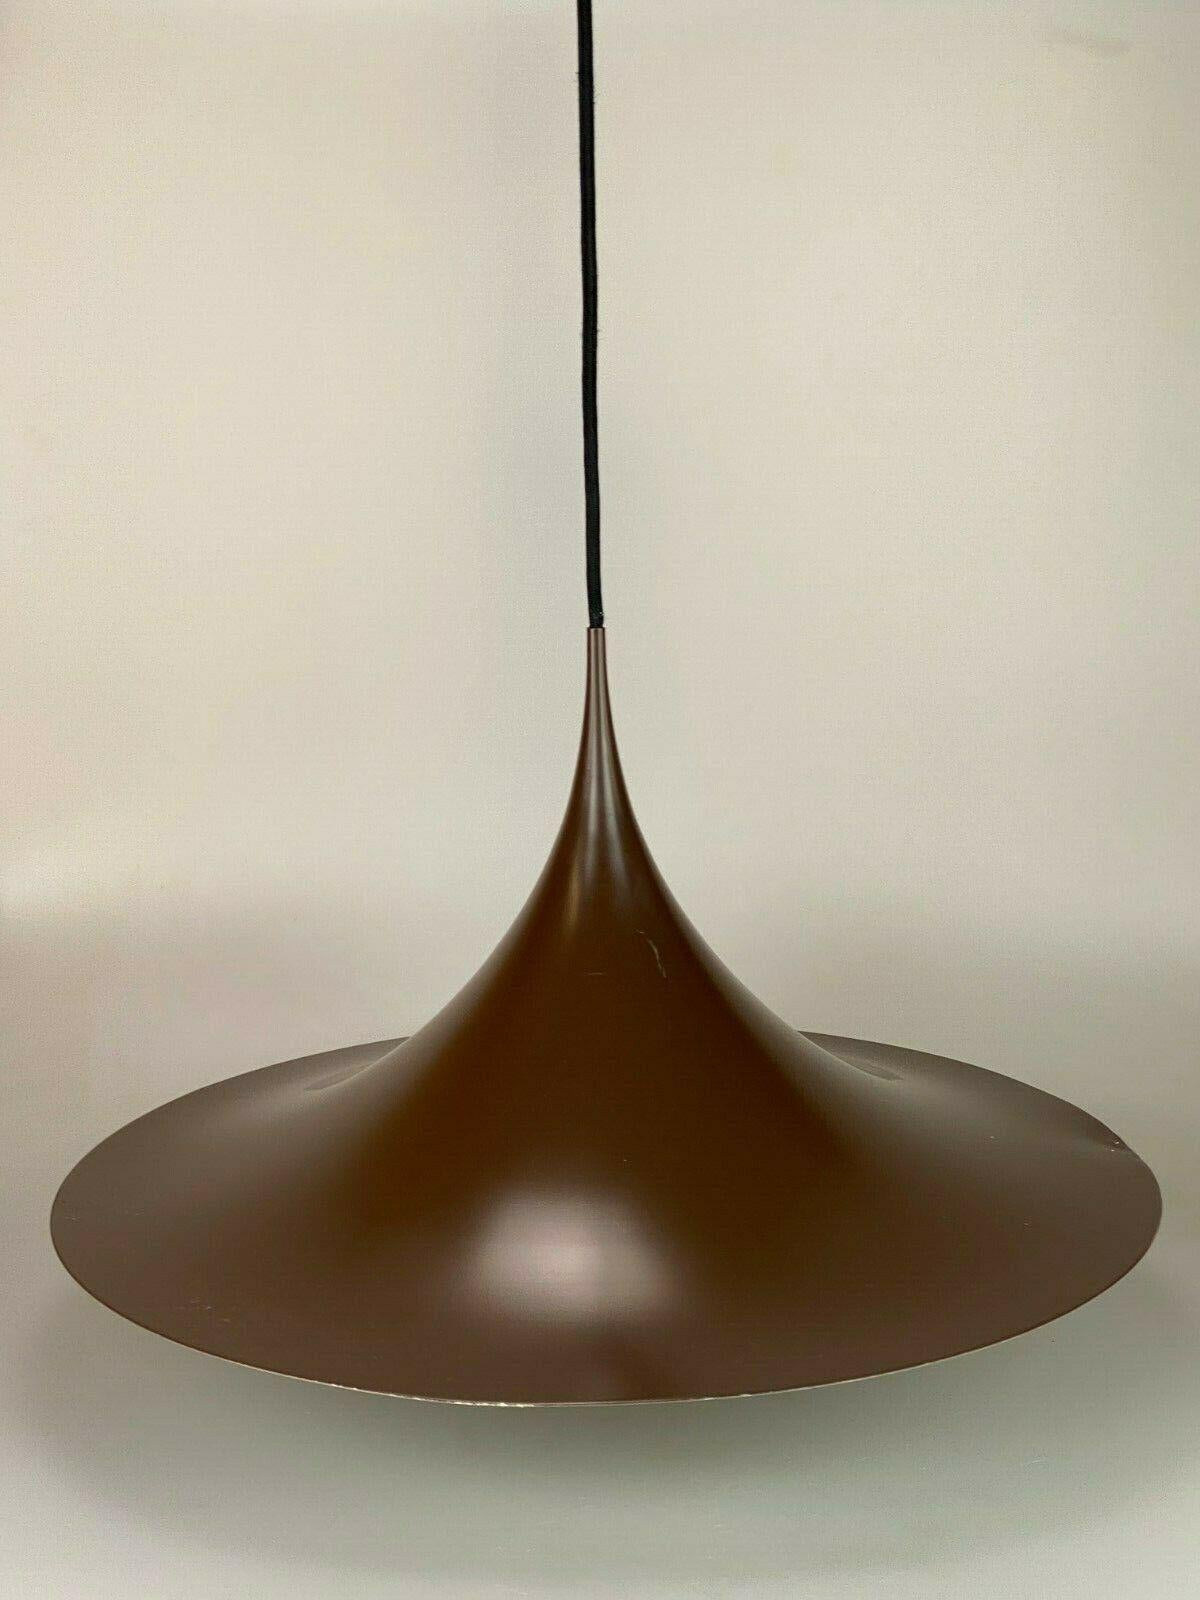 60s 70s lamp light Fog & Morup Semi Space Age Danish Denmark design

Object: ceiling lamp

Manufacturer: Fog & Morup

Condition: good - vintage

Age: around 1960-1970

Dimensions:

Diameter = 60cm
Height = 33cm

Other notes:

The